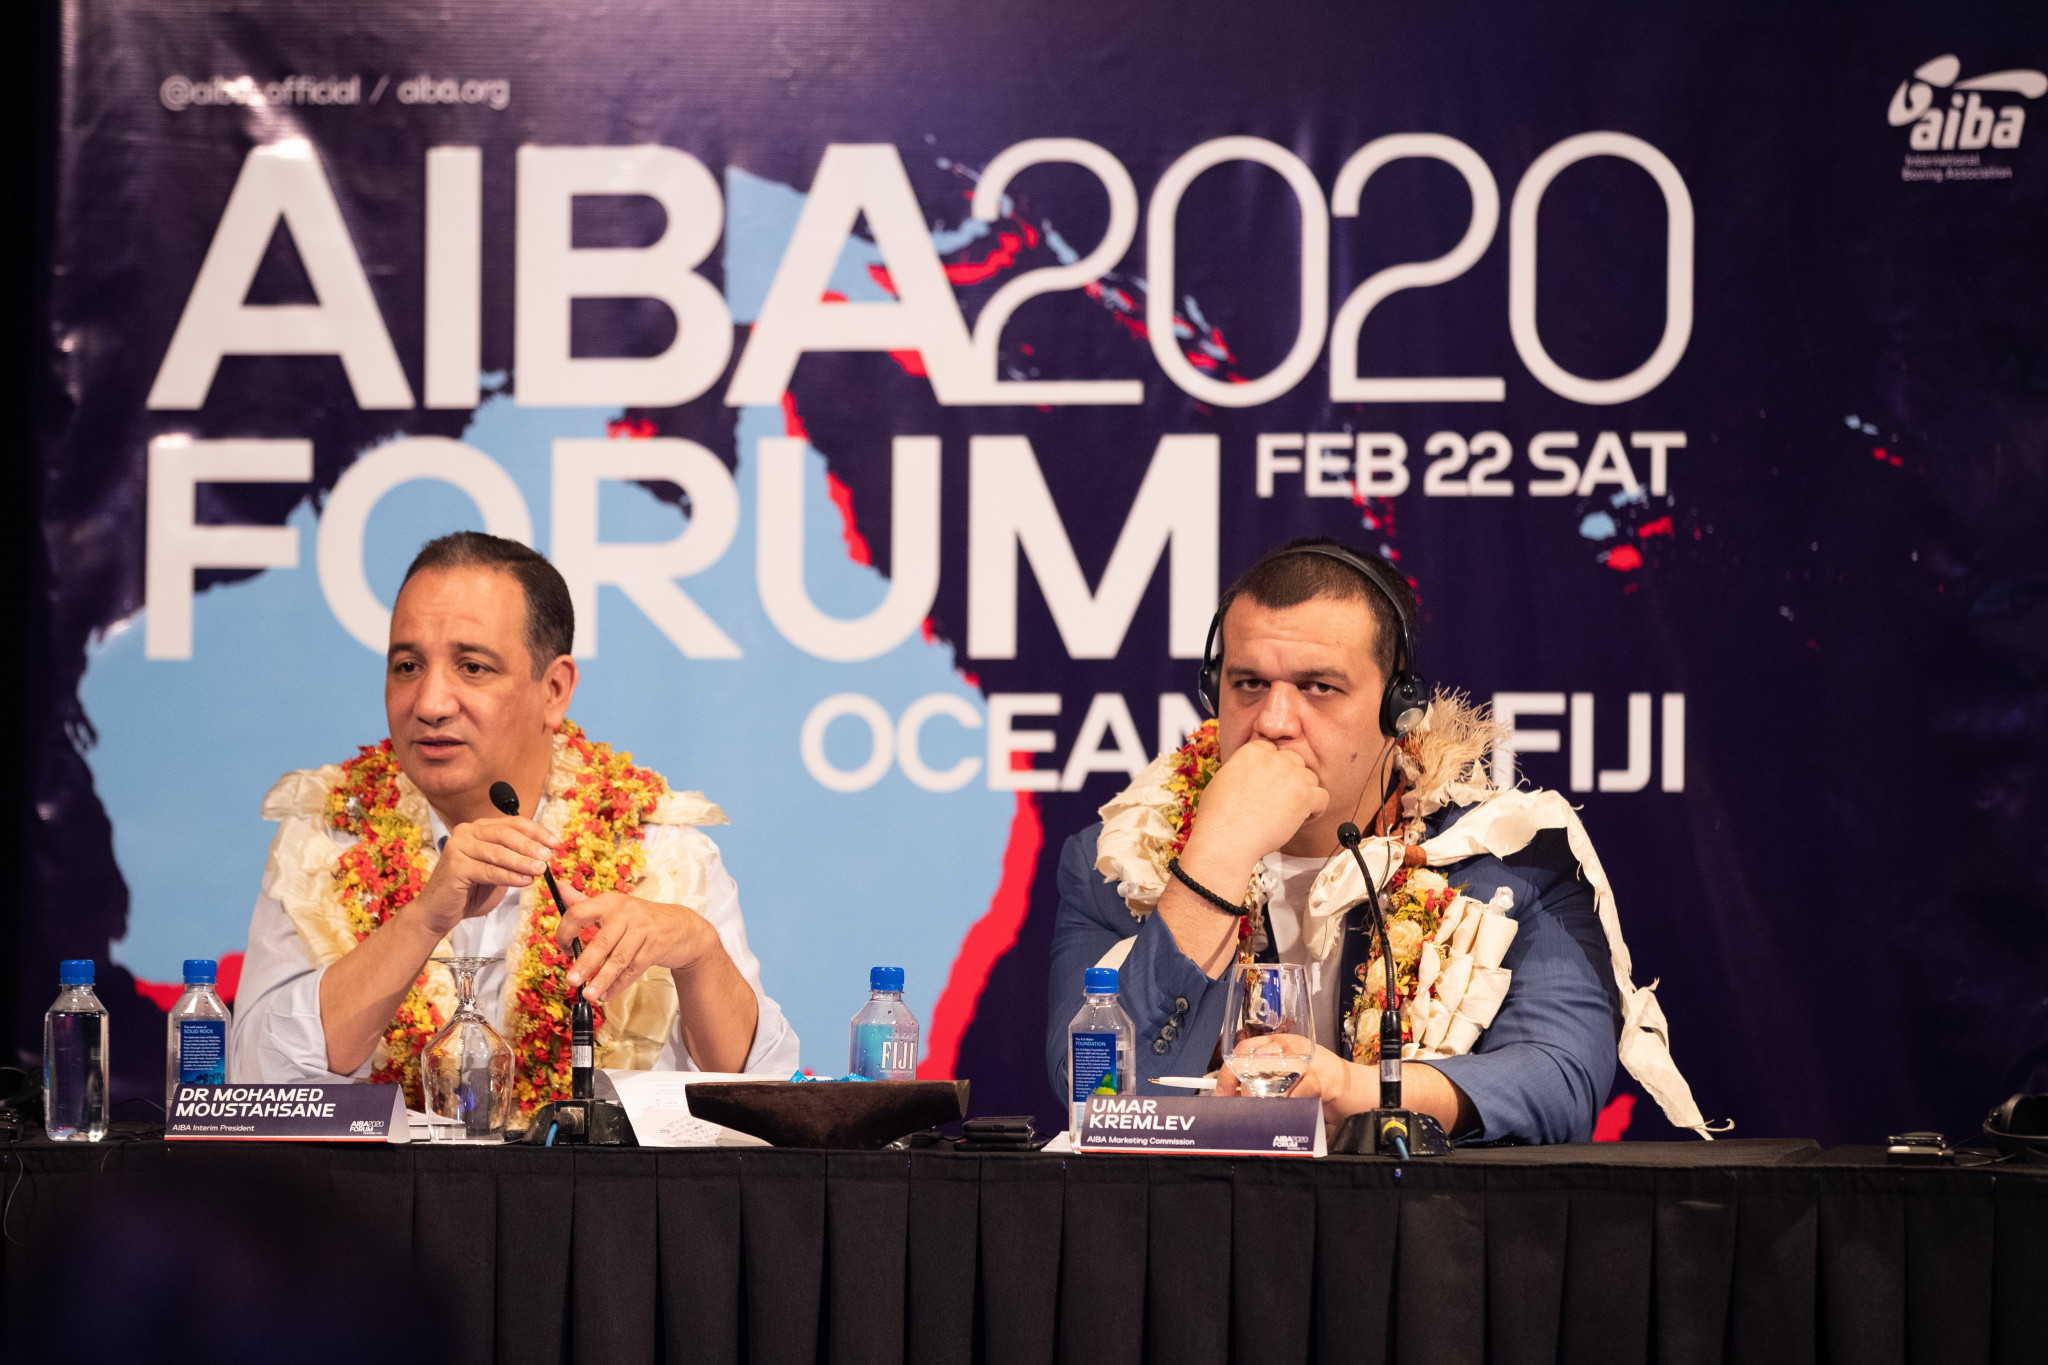 AIBA leadership visit Fiji for second Continental Boxing Forum